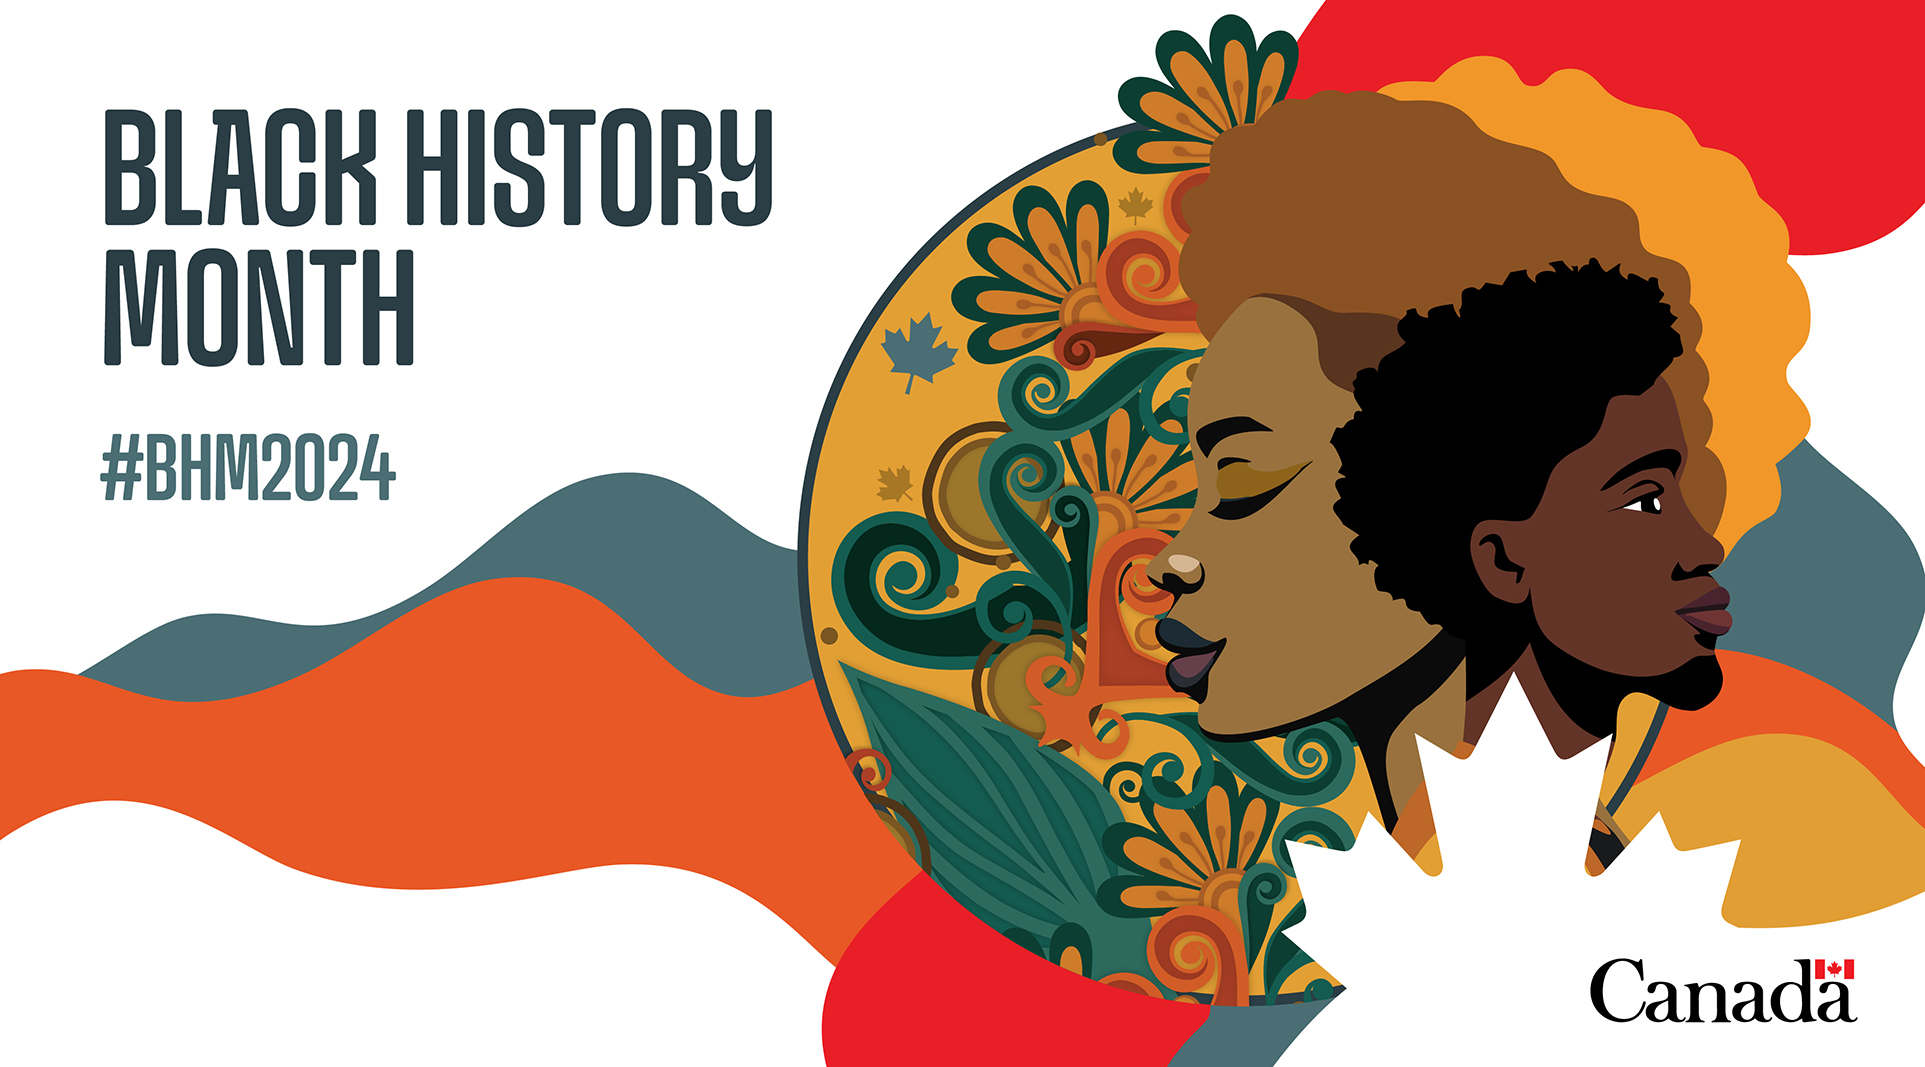 Black History Month 2024 poster with the logo of Canada and the hashtag BHM2024